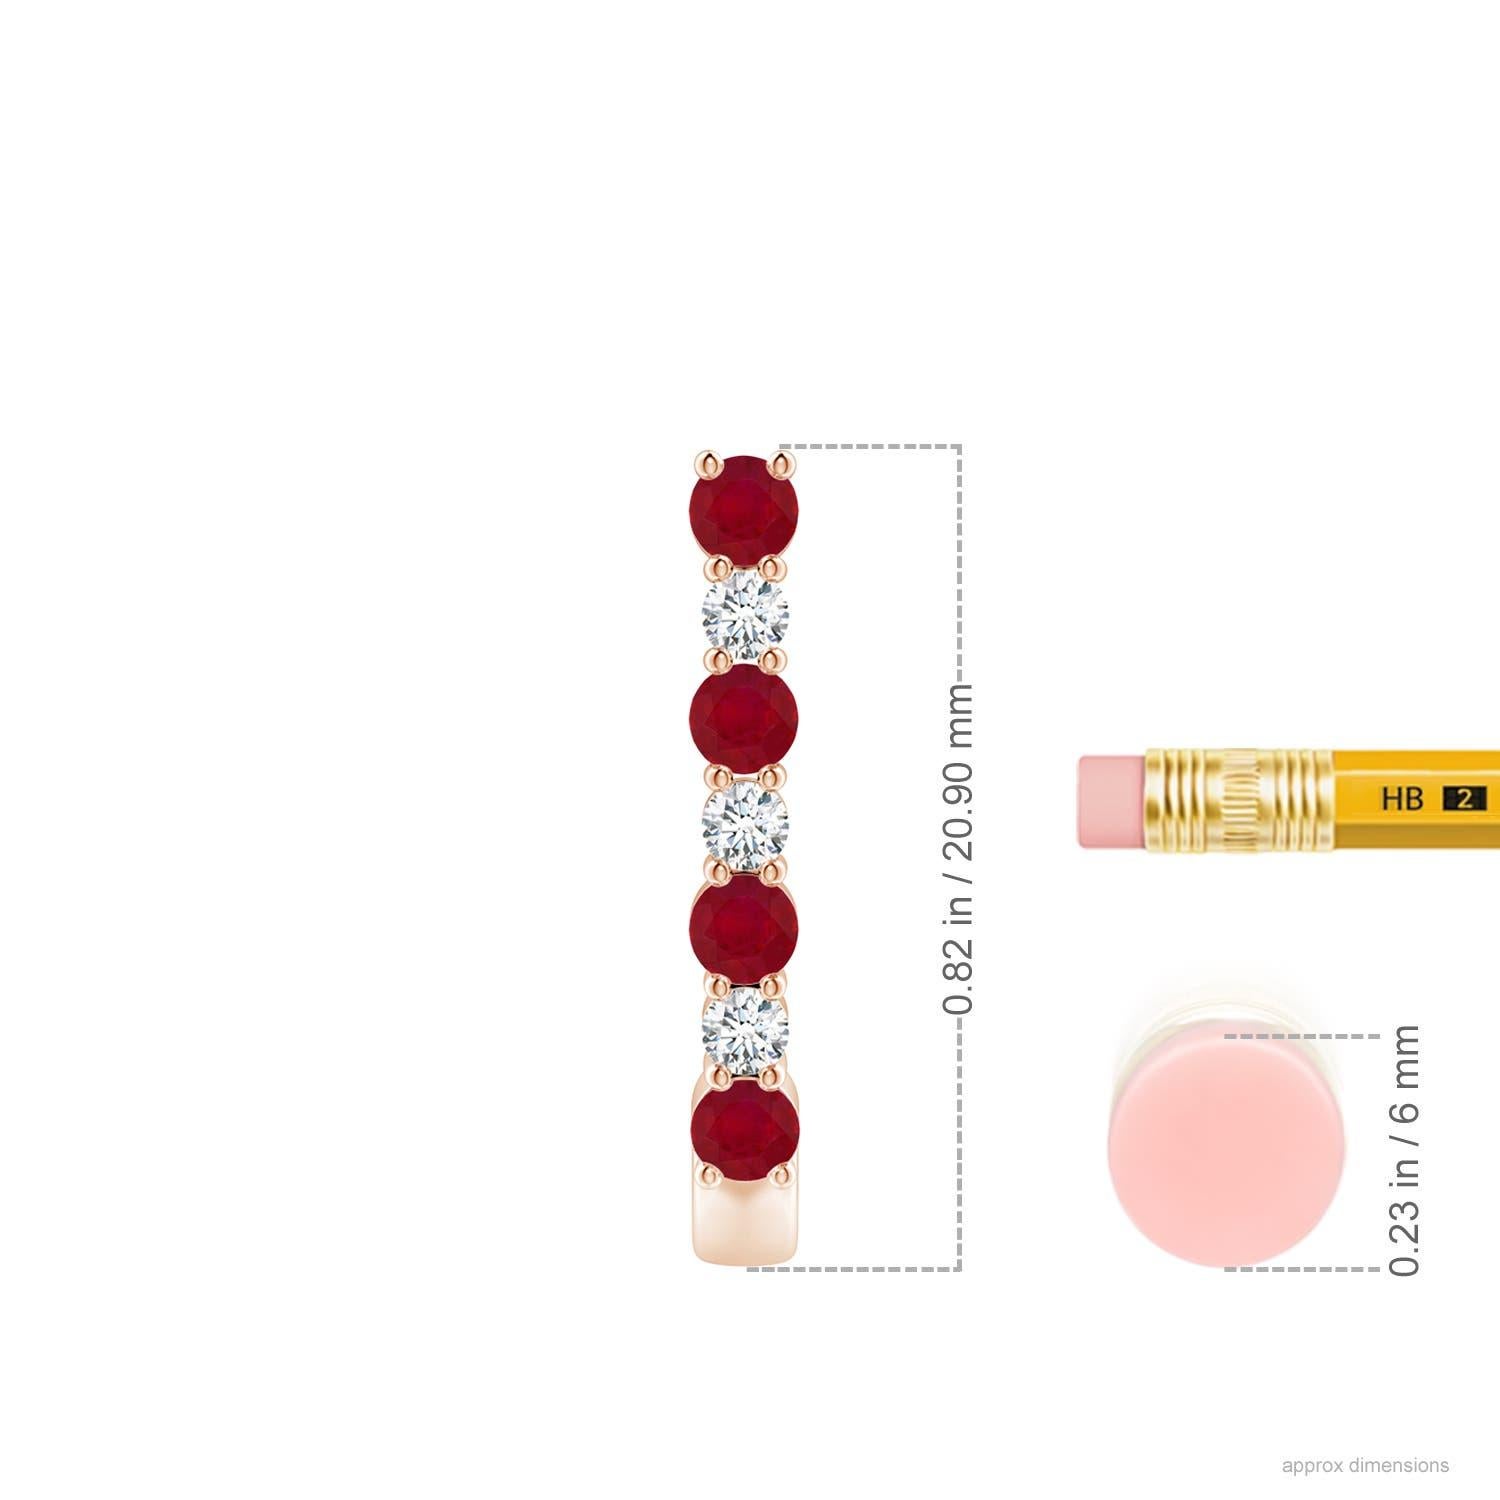 These stunning ruby and diamond hoop earrings are exquisitely crafted in 14k rose gold. The J hoops are alternately studded with bright red rubies and sparkling diamonds for a captivating effect.
Ruby is the Birthstone for July and traditional gift